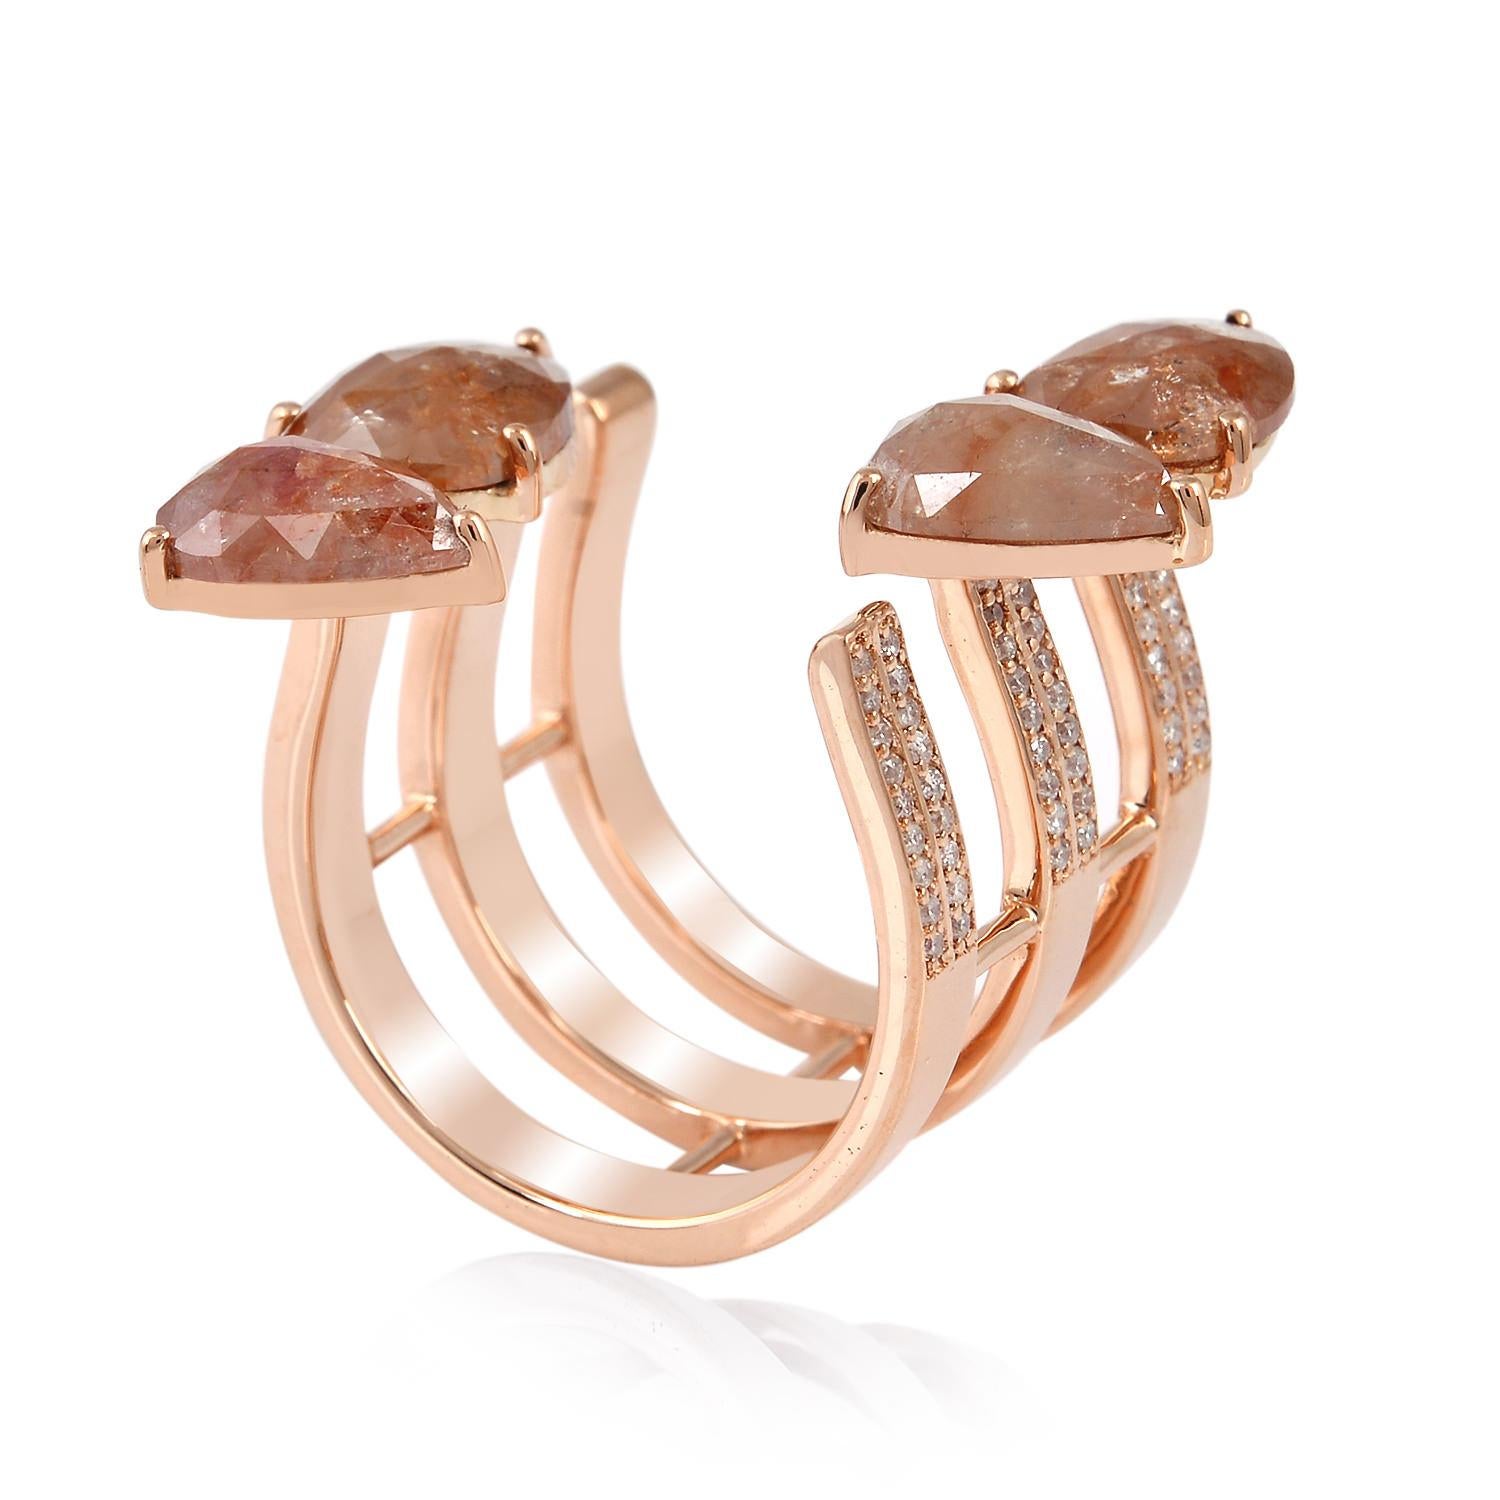 Mixed Cut Pear Shaped Ice Diamond Ring Made In 18k Rose Gold For Sale